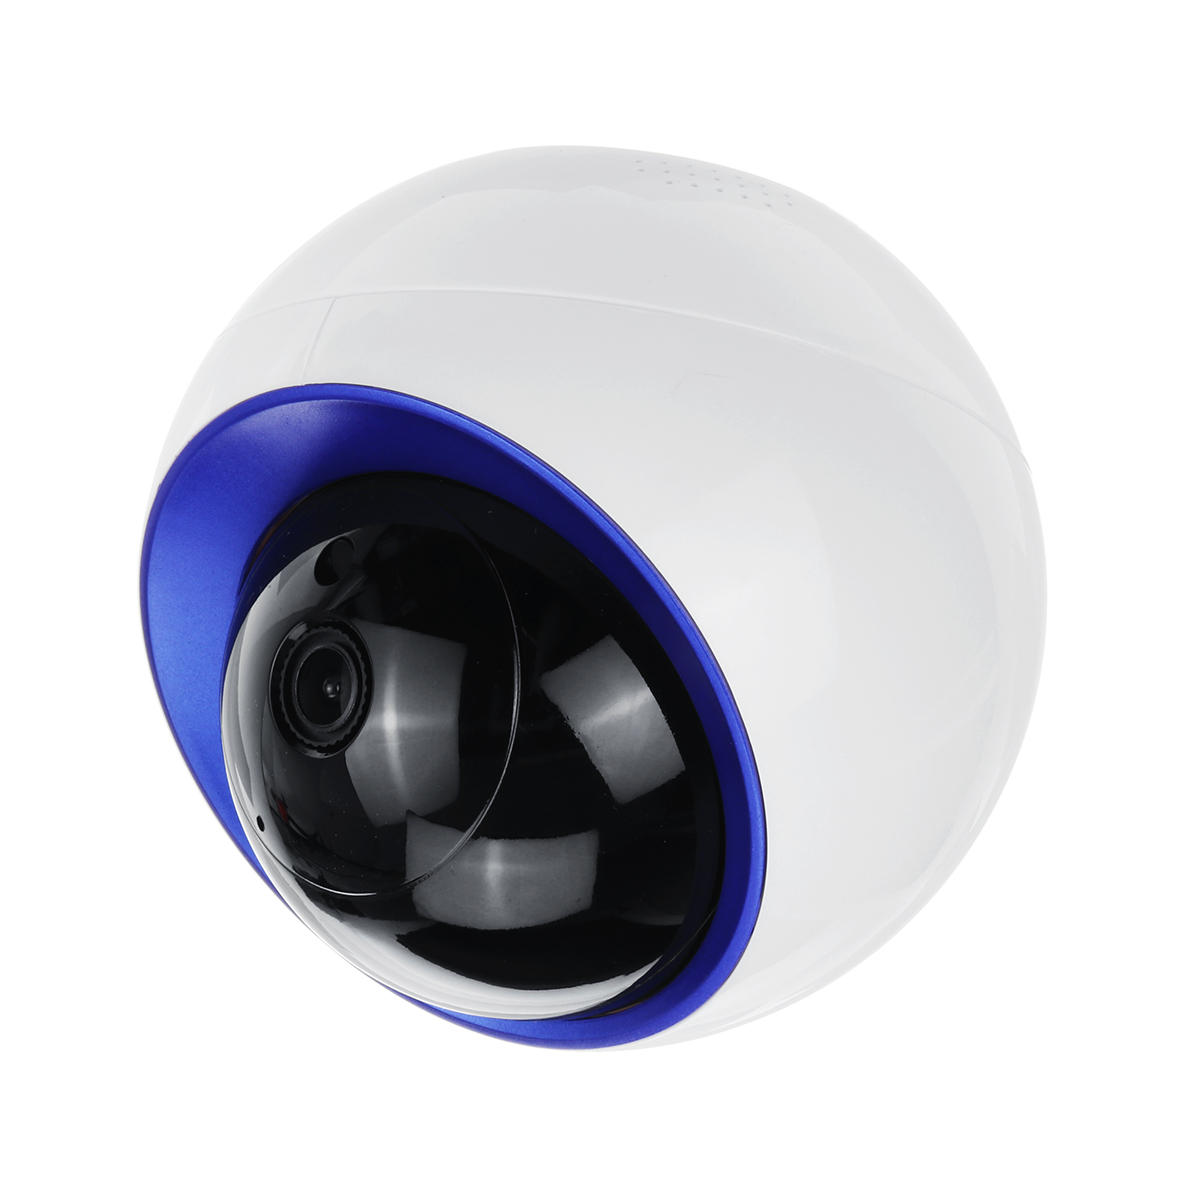 Doodle APP 1080P 2mp wireless IP camera space ball design cradle night vision function 355? rotation